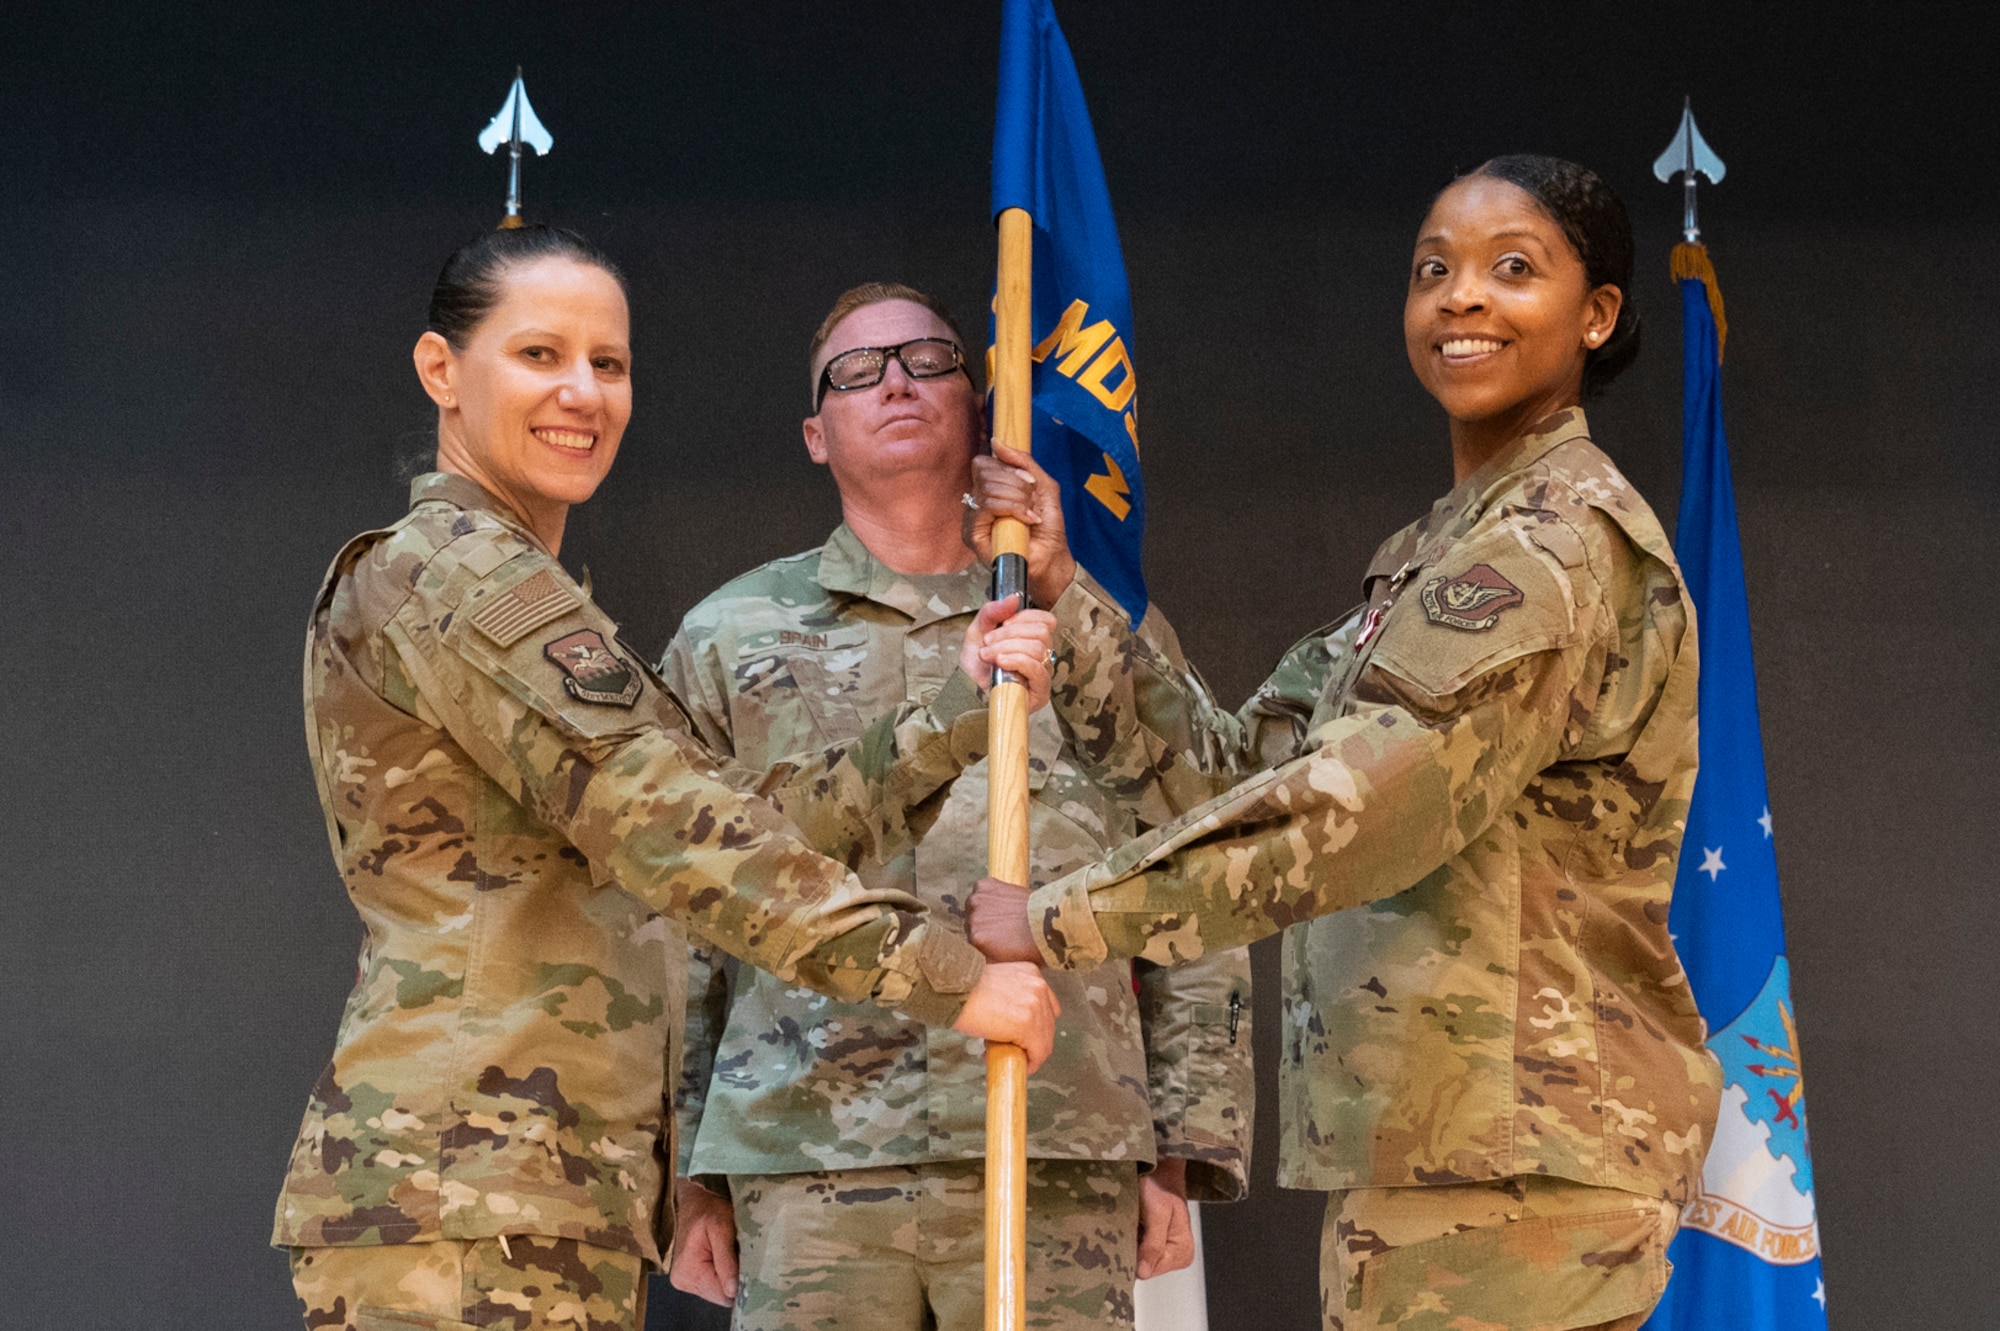 Col. Jennifer Vecchione, 51st Fighter Wing Medical Group commander, left, receives the guidon from Col. Theodosia Montgomery, 51st Medical Support Squadron (MDSS) outgoing commander